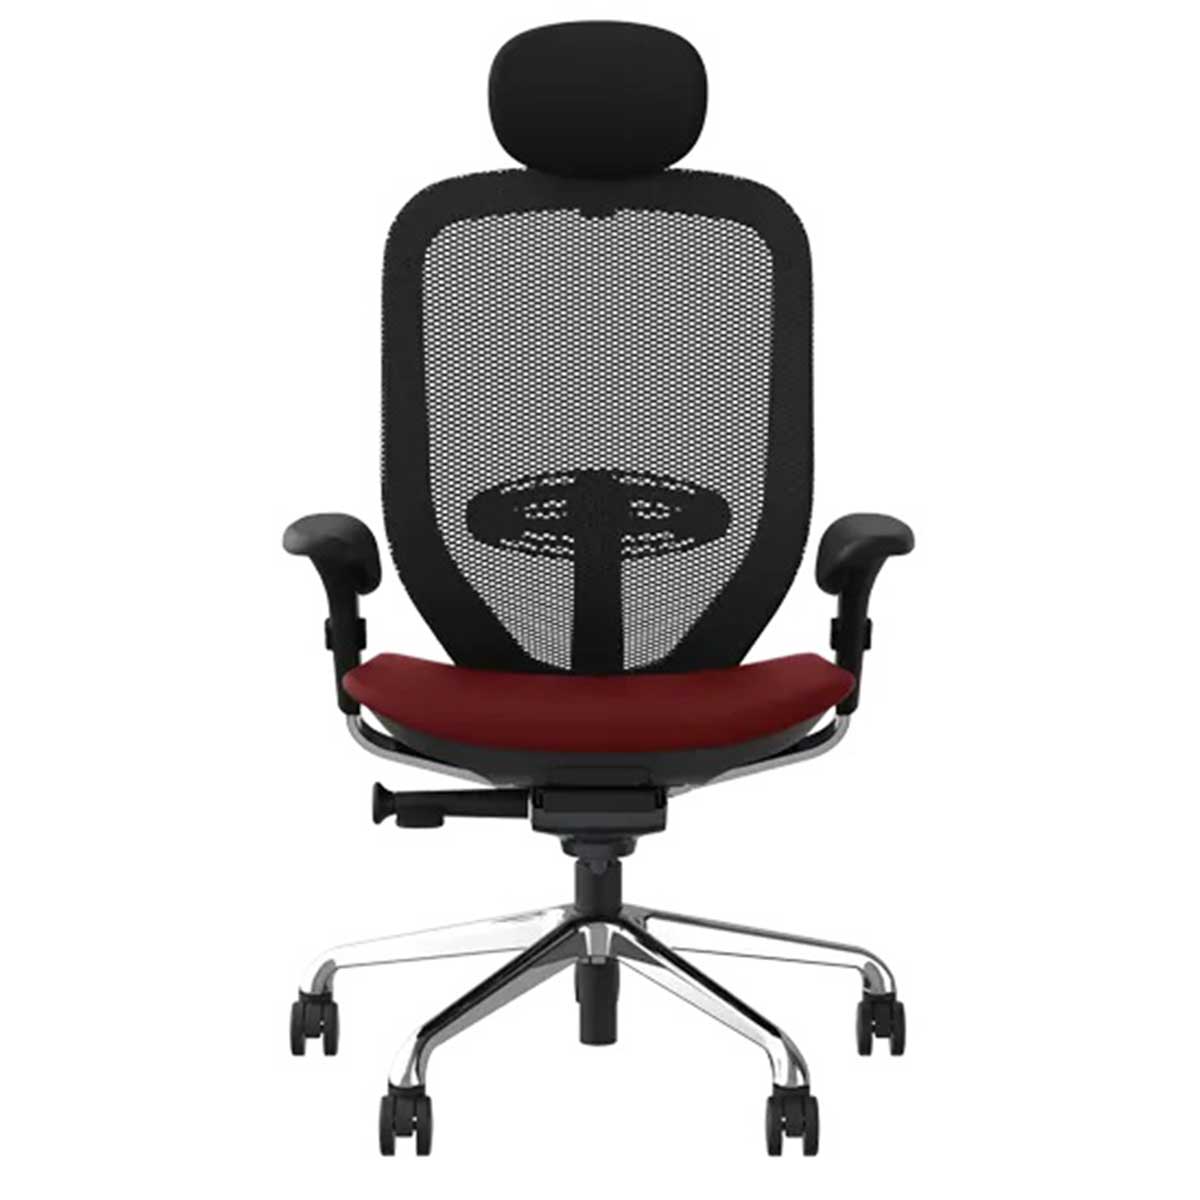 Ergonomic Chairs Manufacturers, Suppliers in Connaught Place